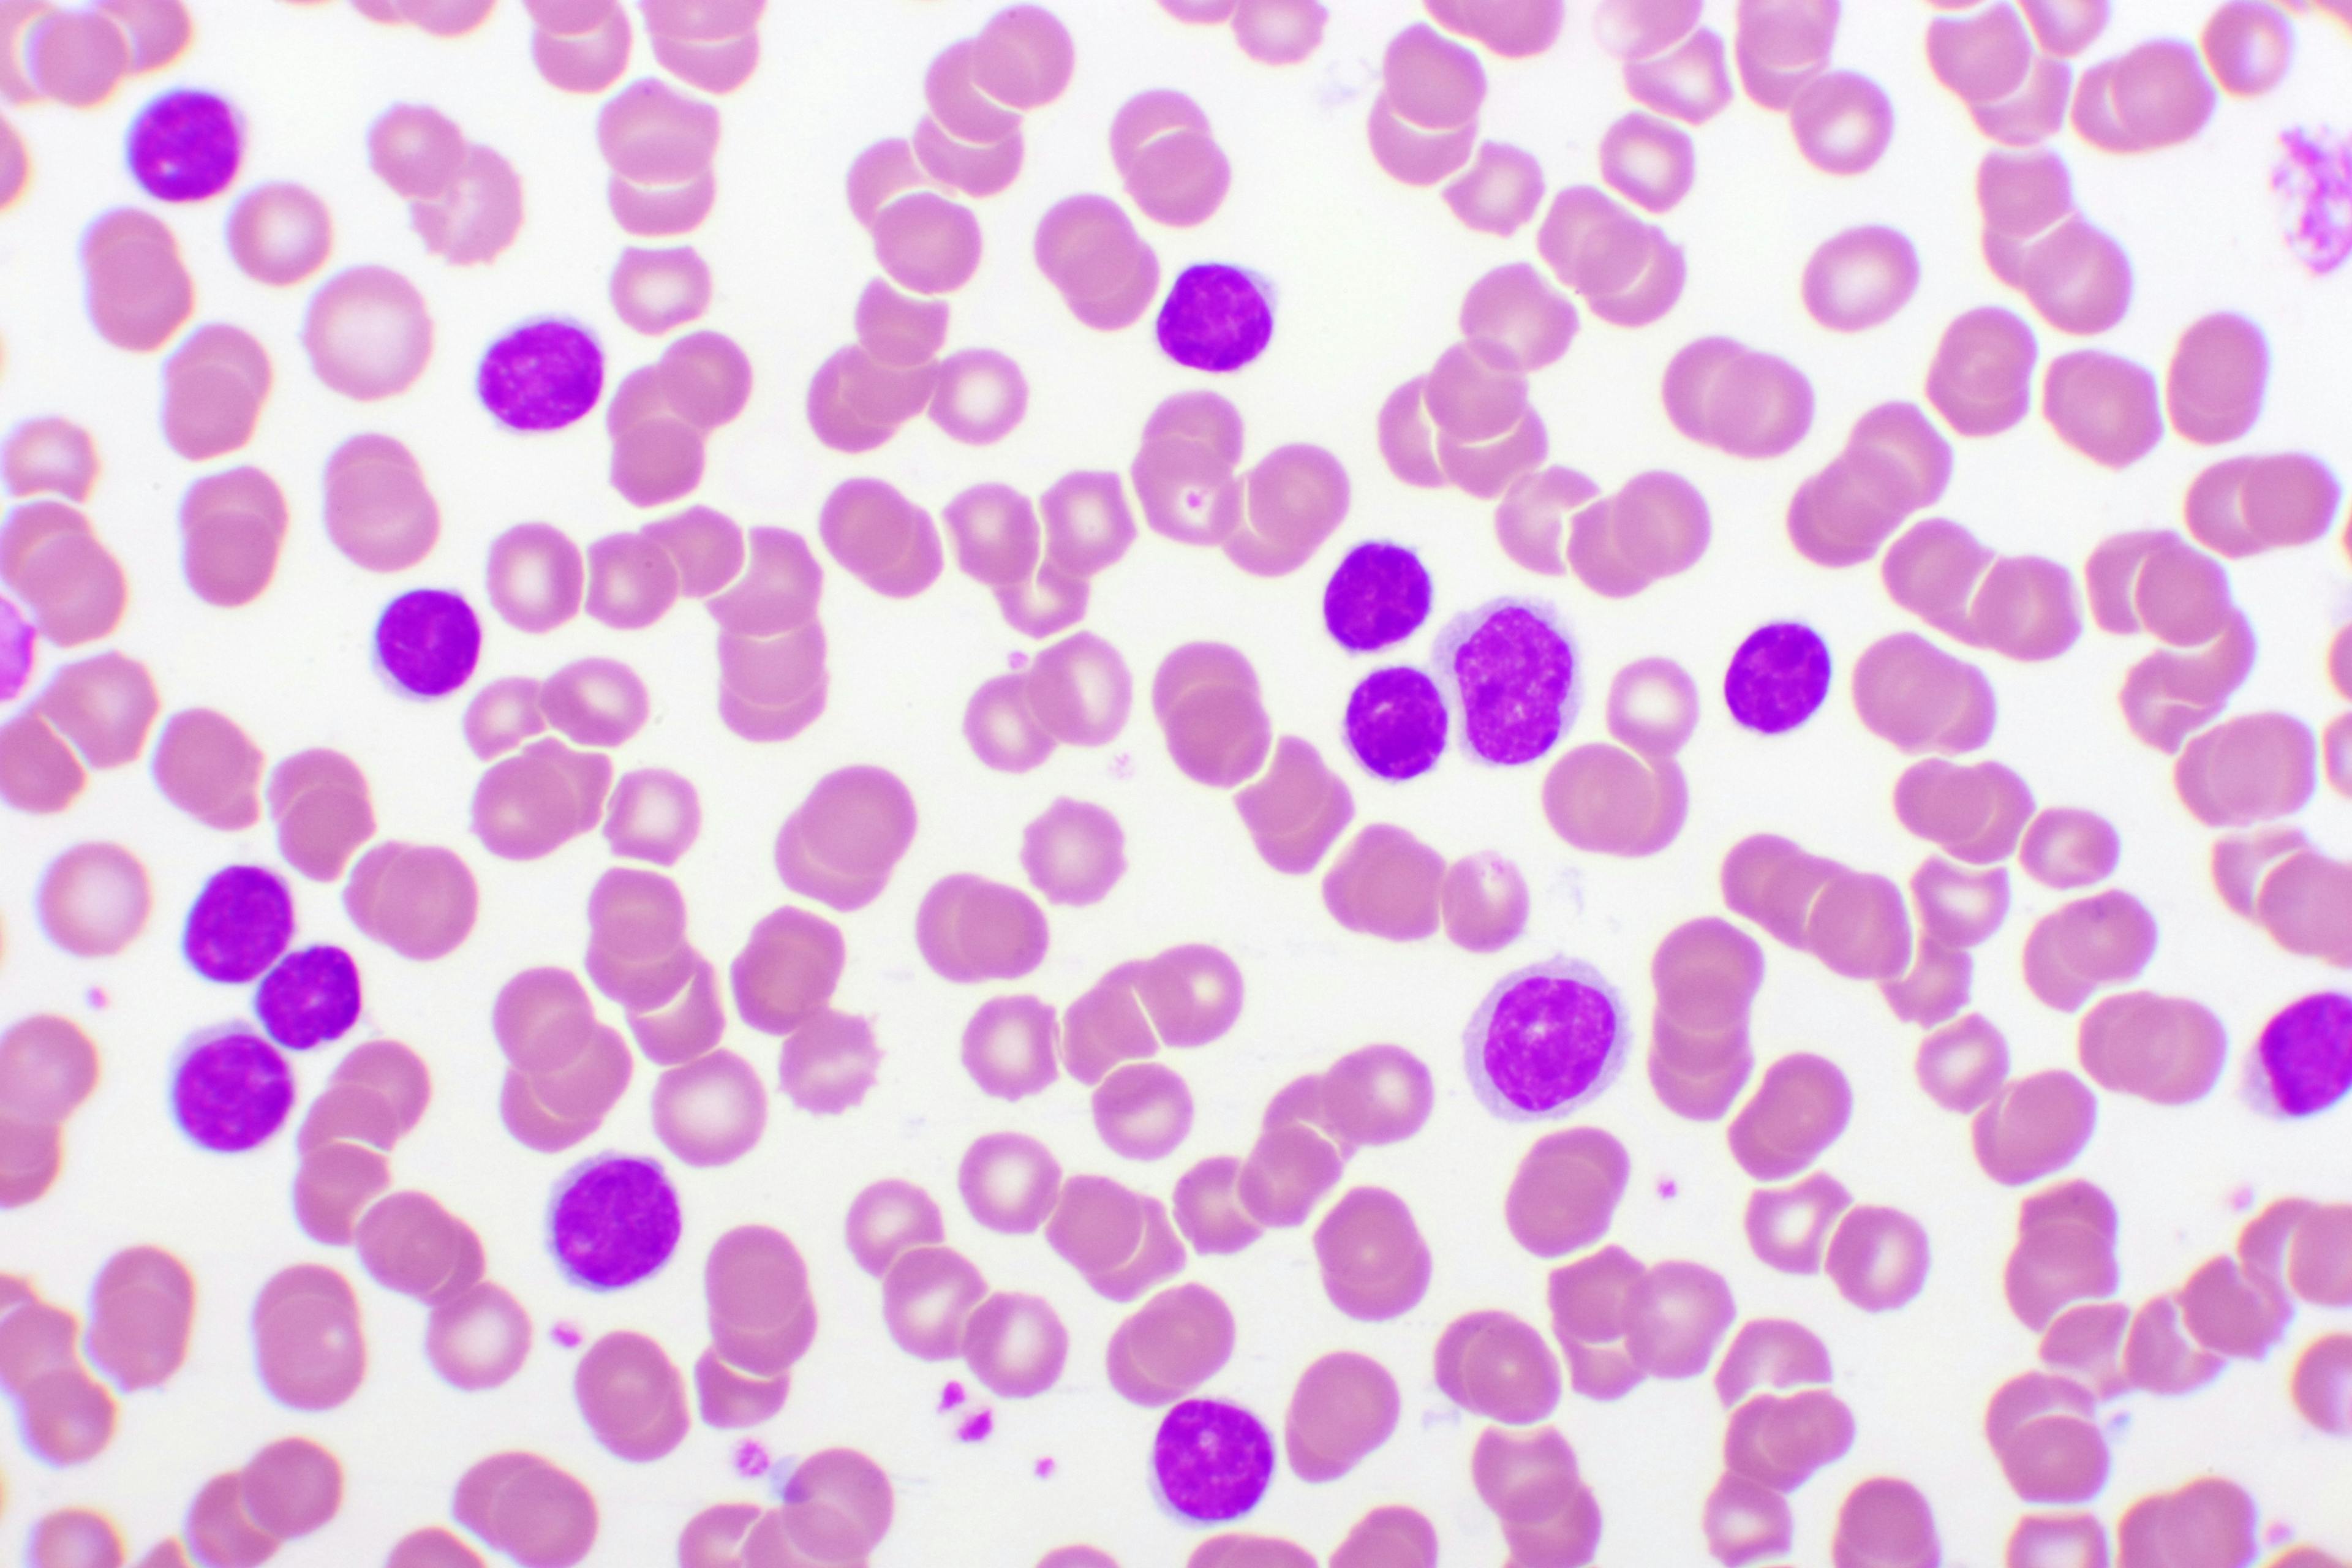 Investigators enrolled a total of 523 patients with CLL. Image Credit: © jarun011 - stock.adobe.com